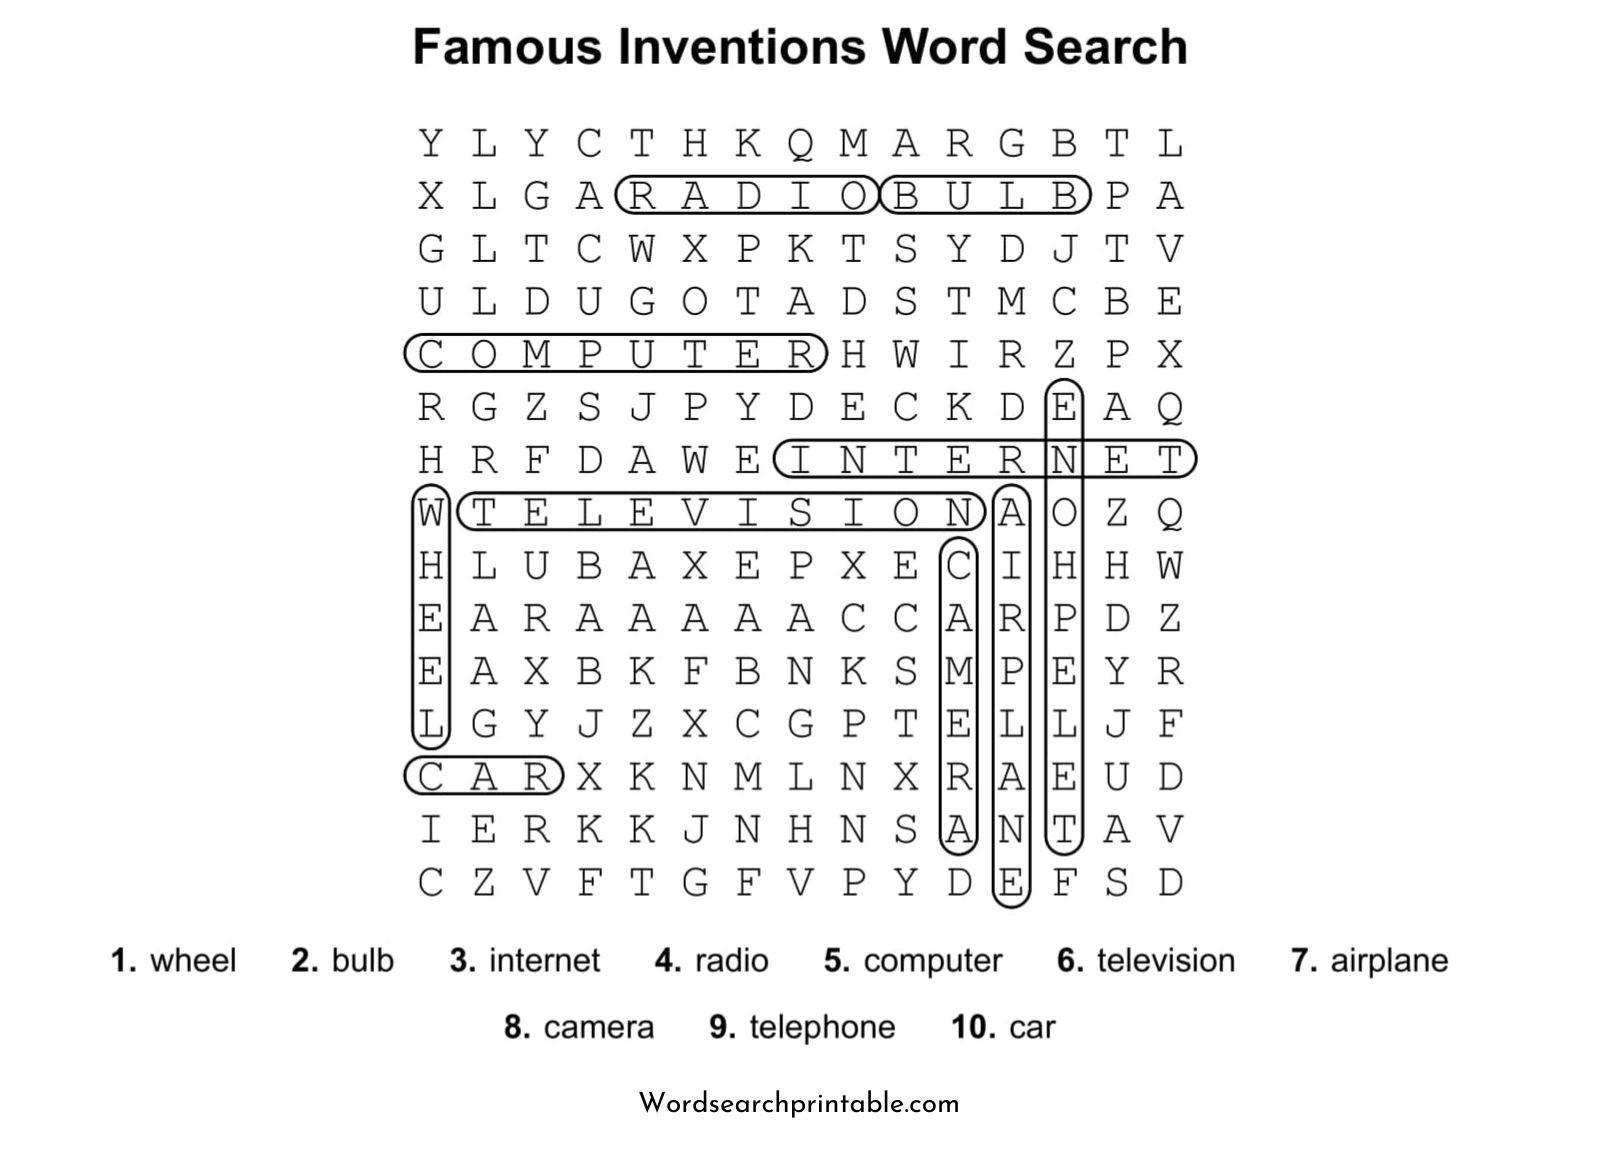 famous inventions word search puzzle solution